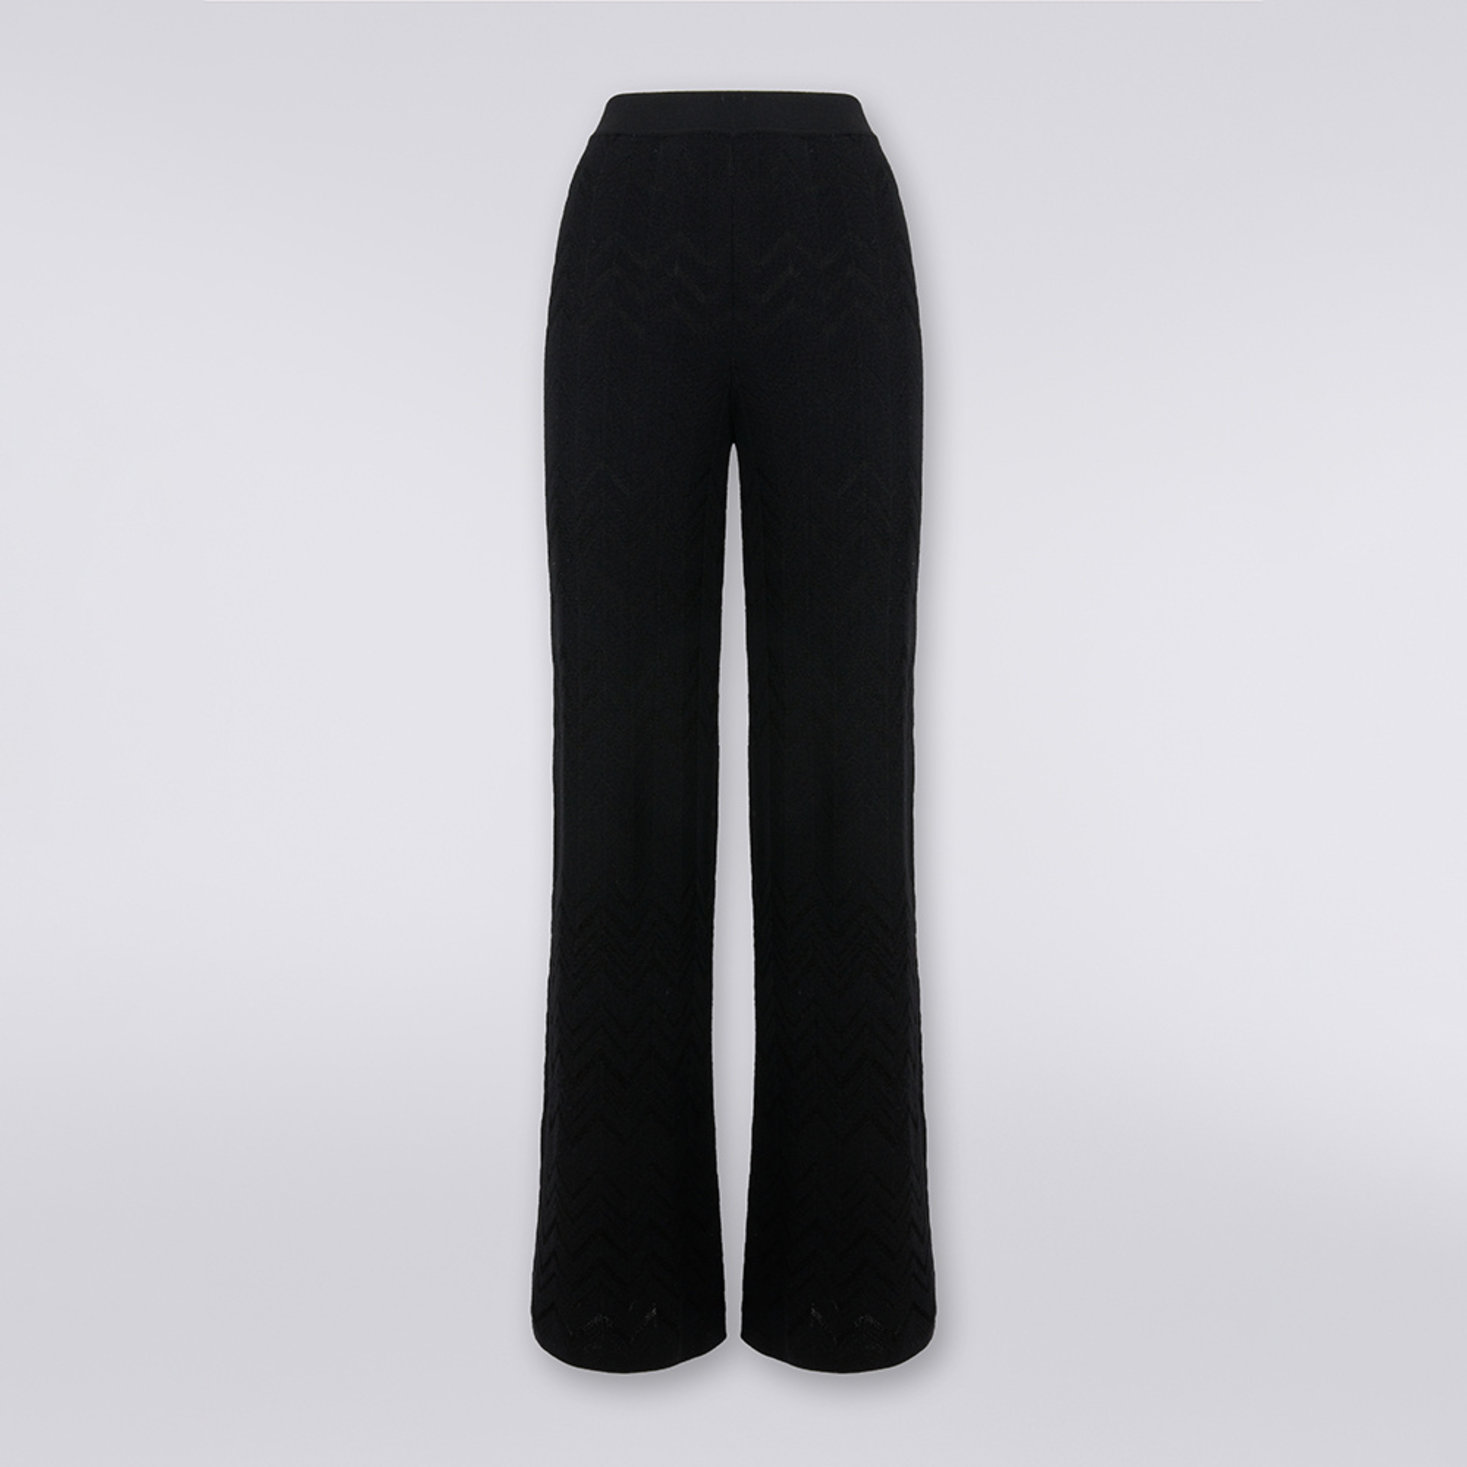 Flared English-ribbed wool and viscose chevron trousers , Black    - DS23WI0SBK027A93911 - 5